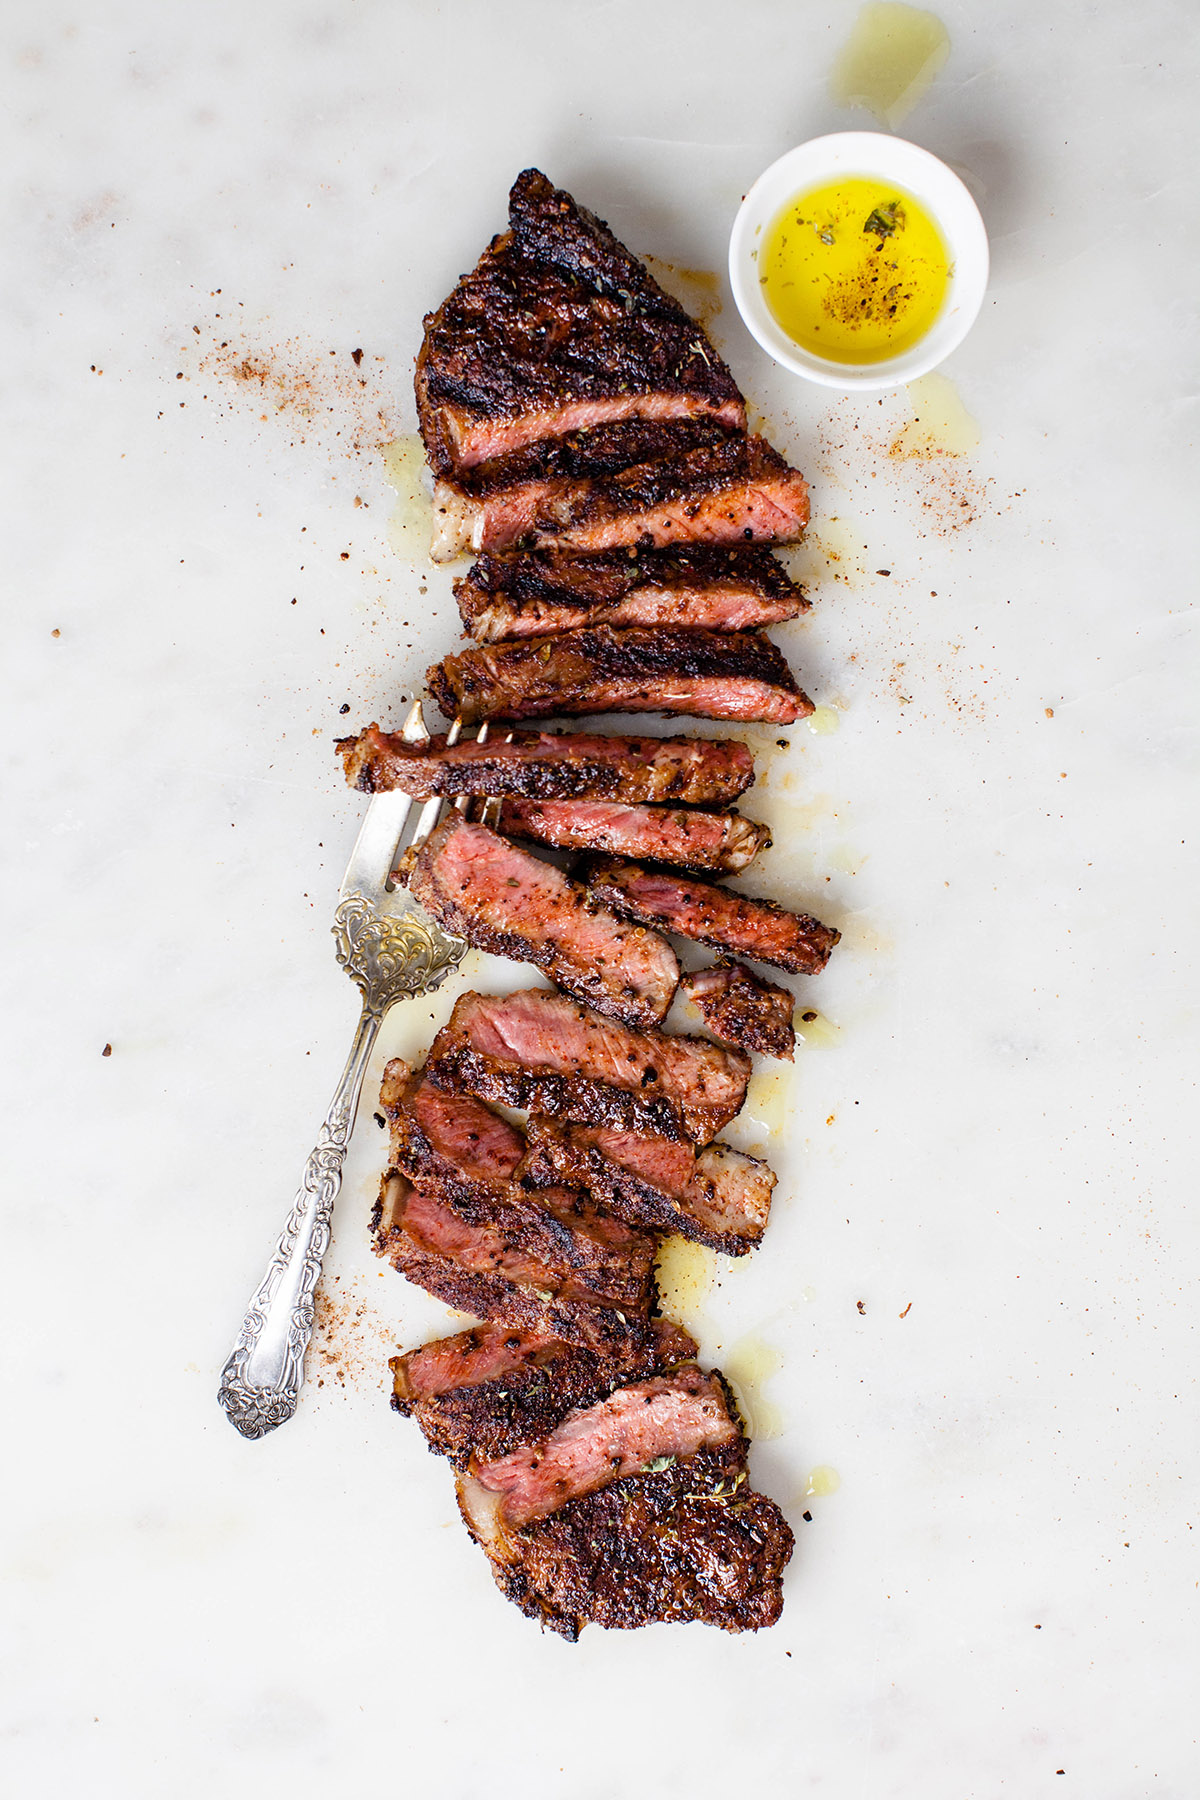 Grilled Steak with Spiced Coffee Rub